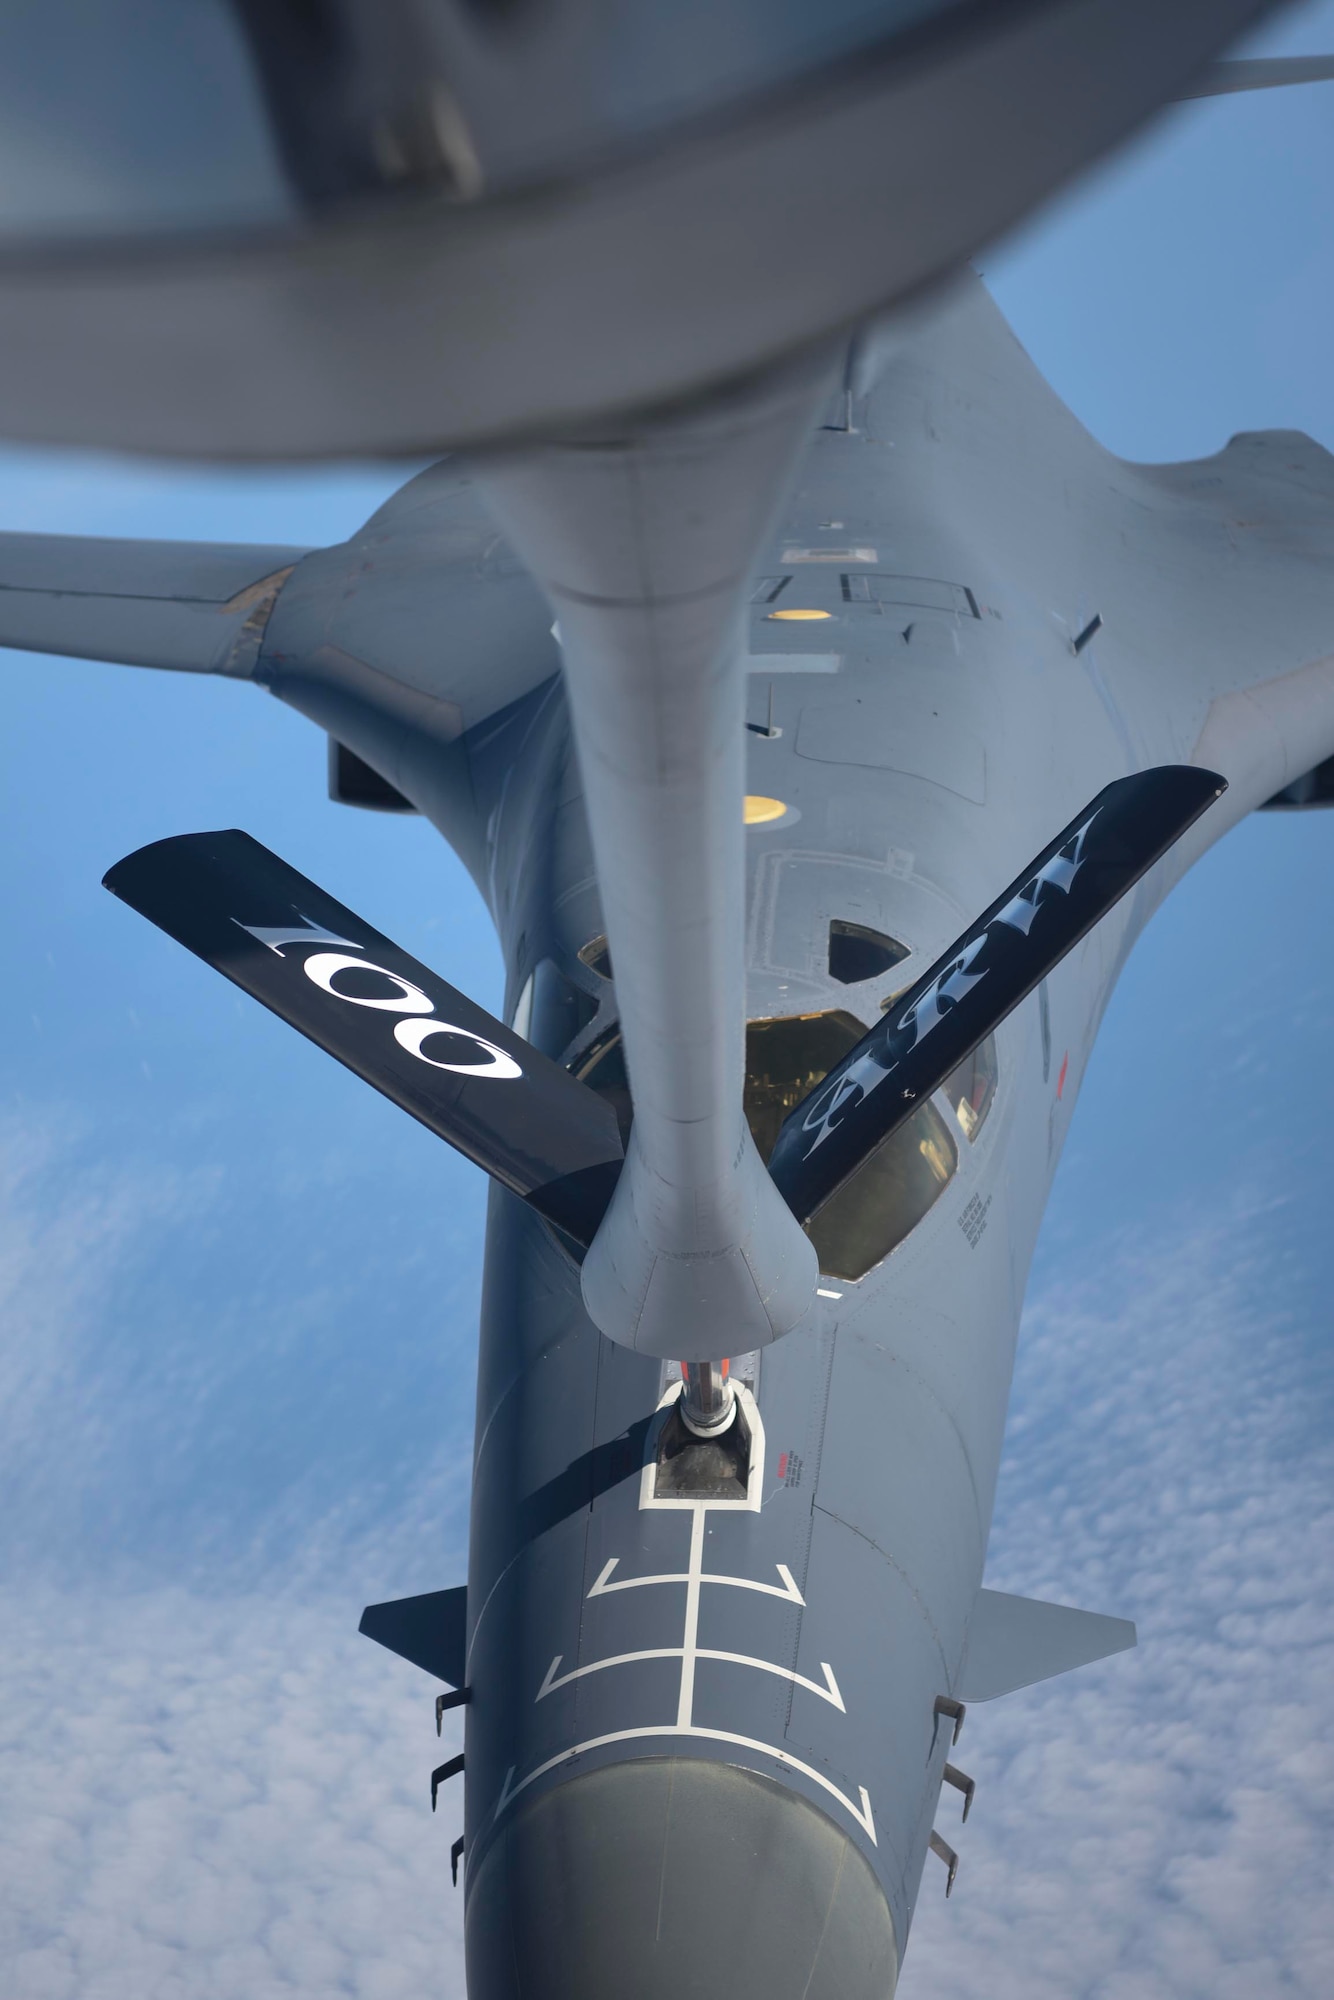 A U.S. Air Force B-1B Lancer aircraft, assigned to the 7th Bomb Wing, Dyess Air Force Base, Texas, receives fuel from a KC-135 Stratotanker aircraft assigned to the 100th Air Refueling Wing, Royal Air Force Mildenhall, England, during a Bomber Task Force mission over the North Sea, March 3, 2021. RAF Mildenhall’s KC-135s enable the rapid response of U.S. bombers across Europe and Africa. (U.S. Air Force photo by Senior Airman Joseph Barron)